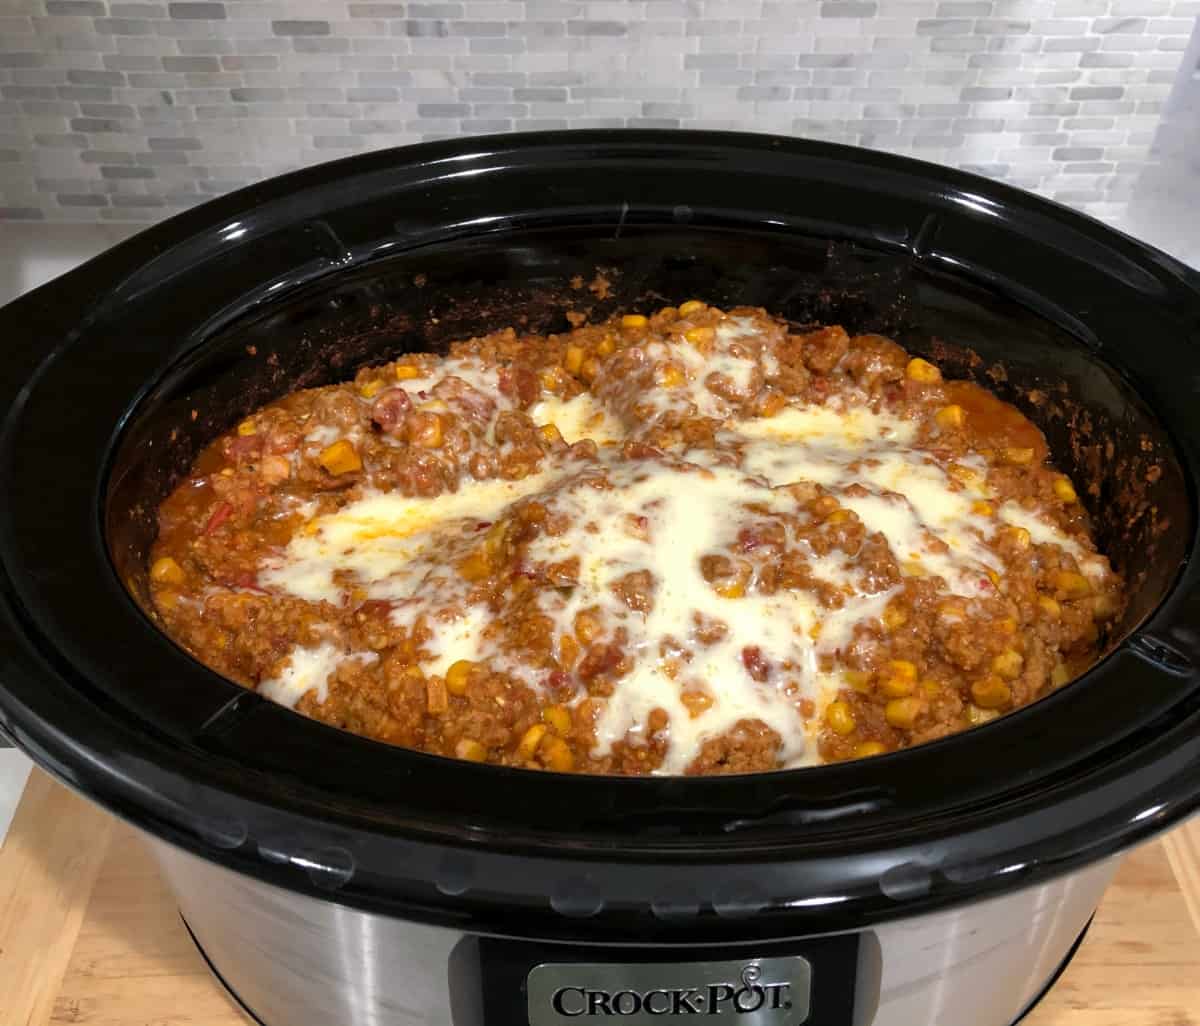 Cooked tamale pie with melted cheese in crock pot.